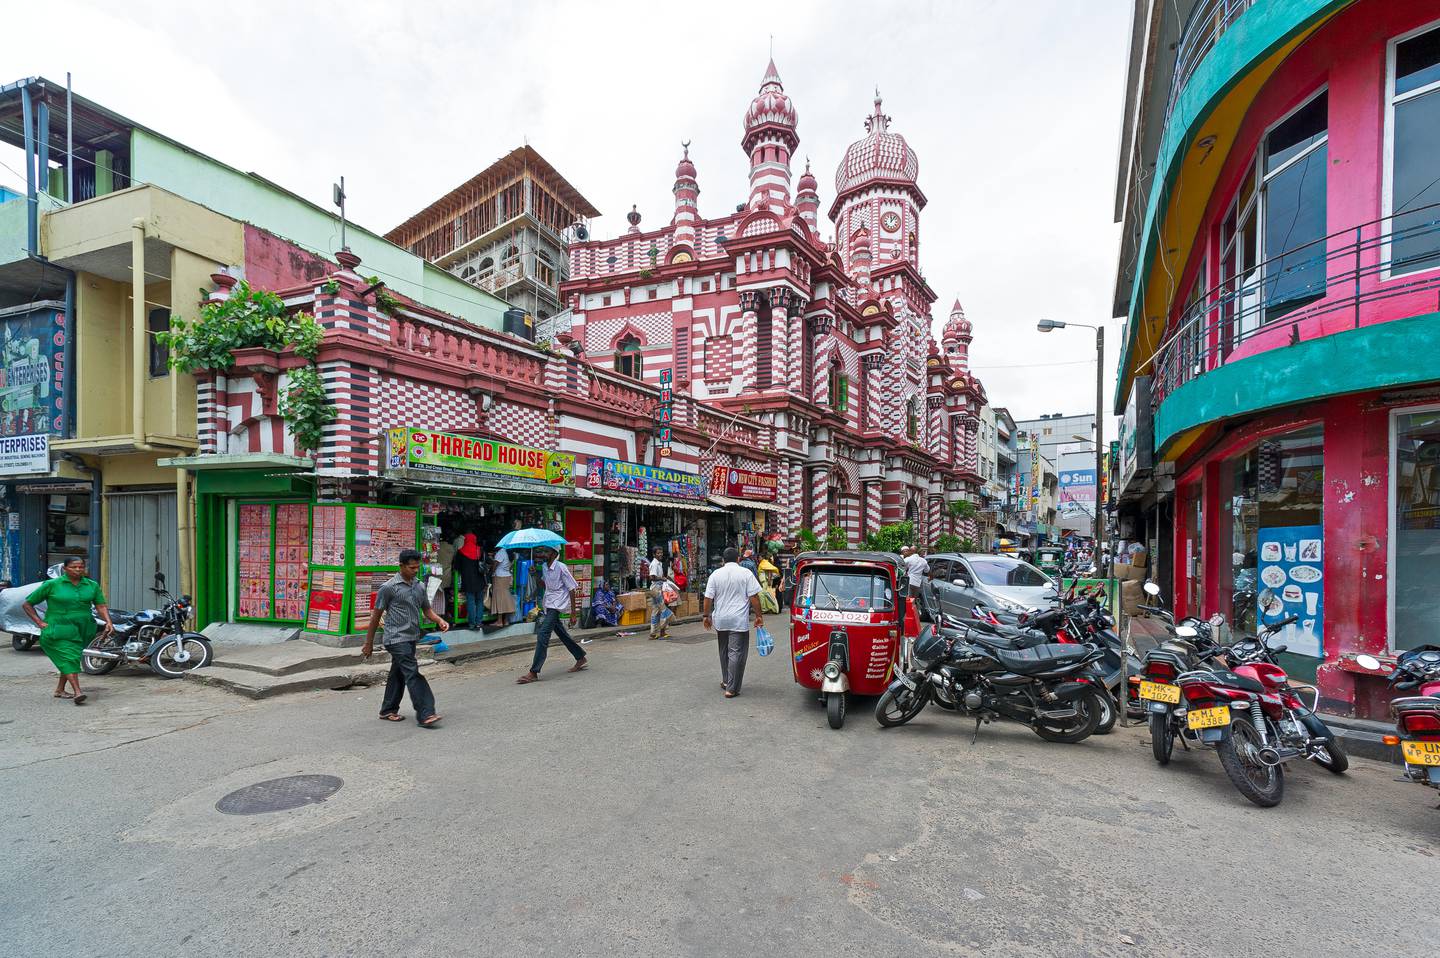 Pettah, where the mosque is located, is a popular shopping district. Alamy Stock Photo